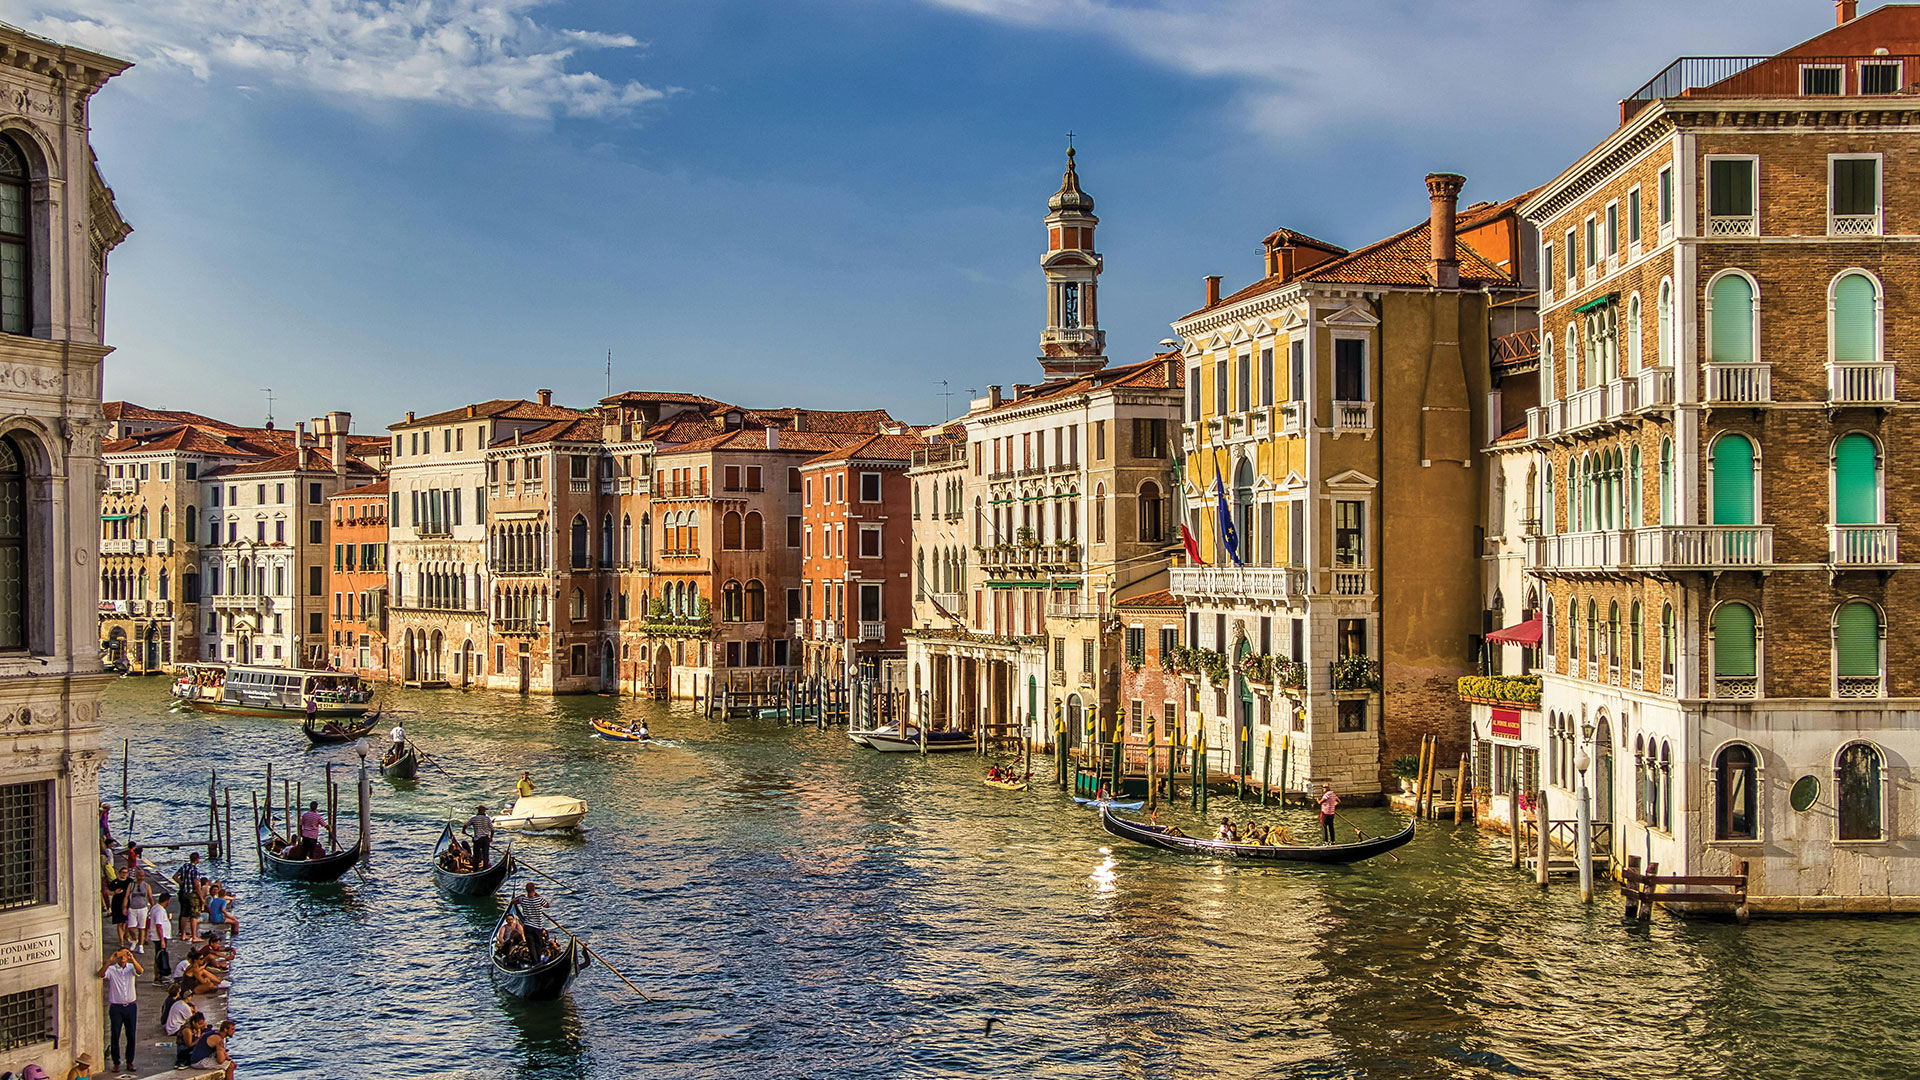 Venetian Finds: With water everywhere and palaces galore, Venice captivates the imagination like no other city